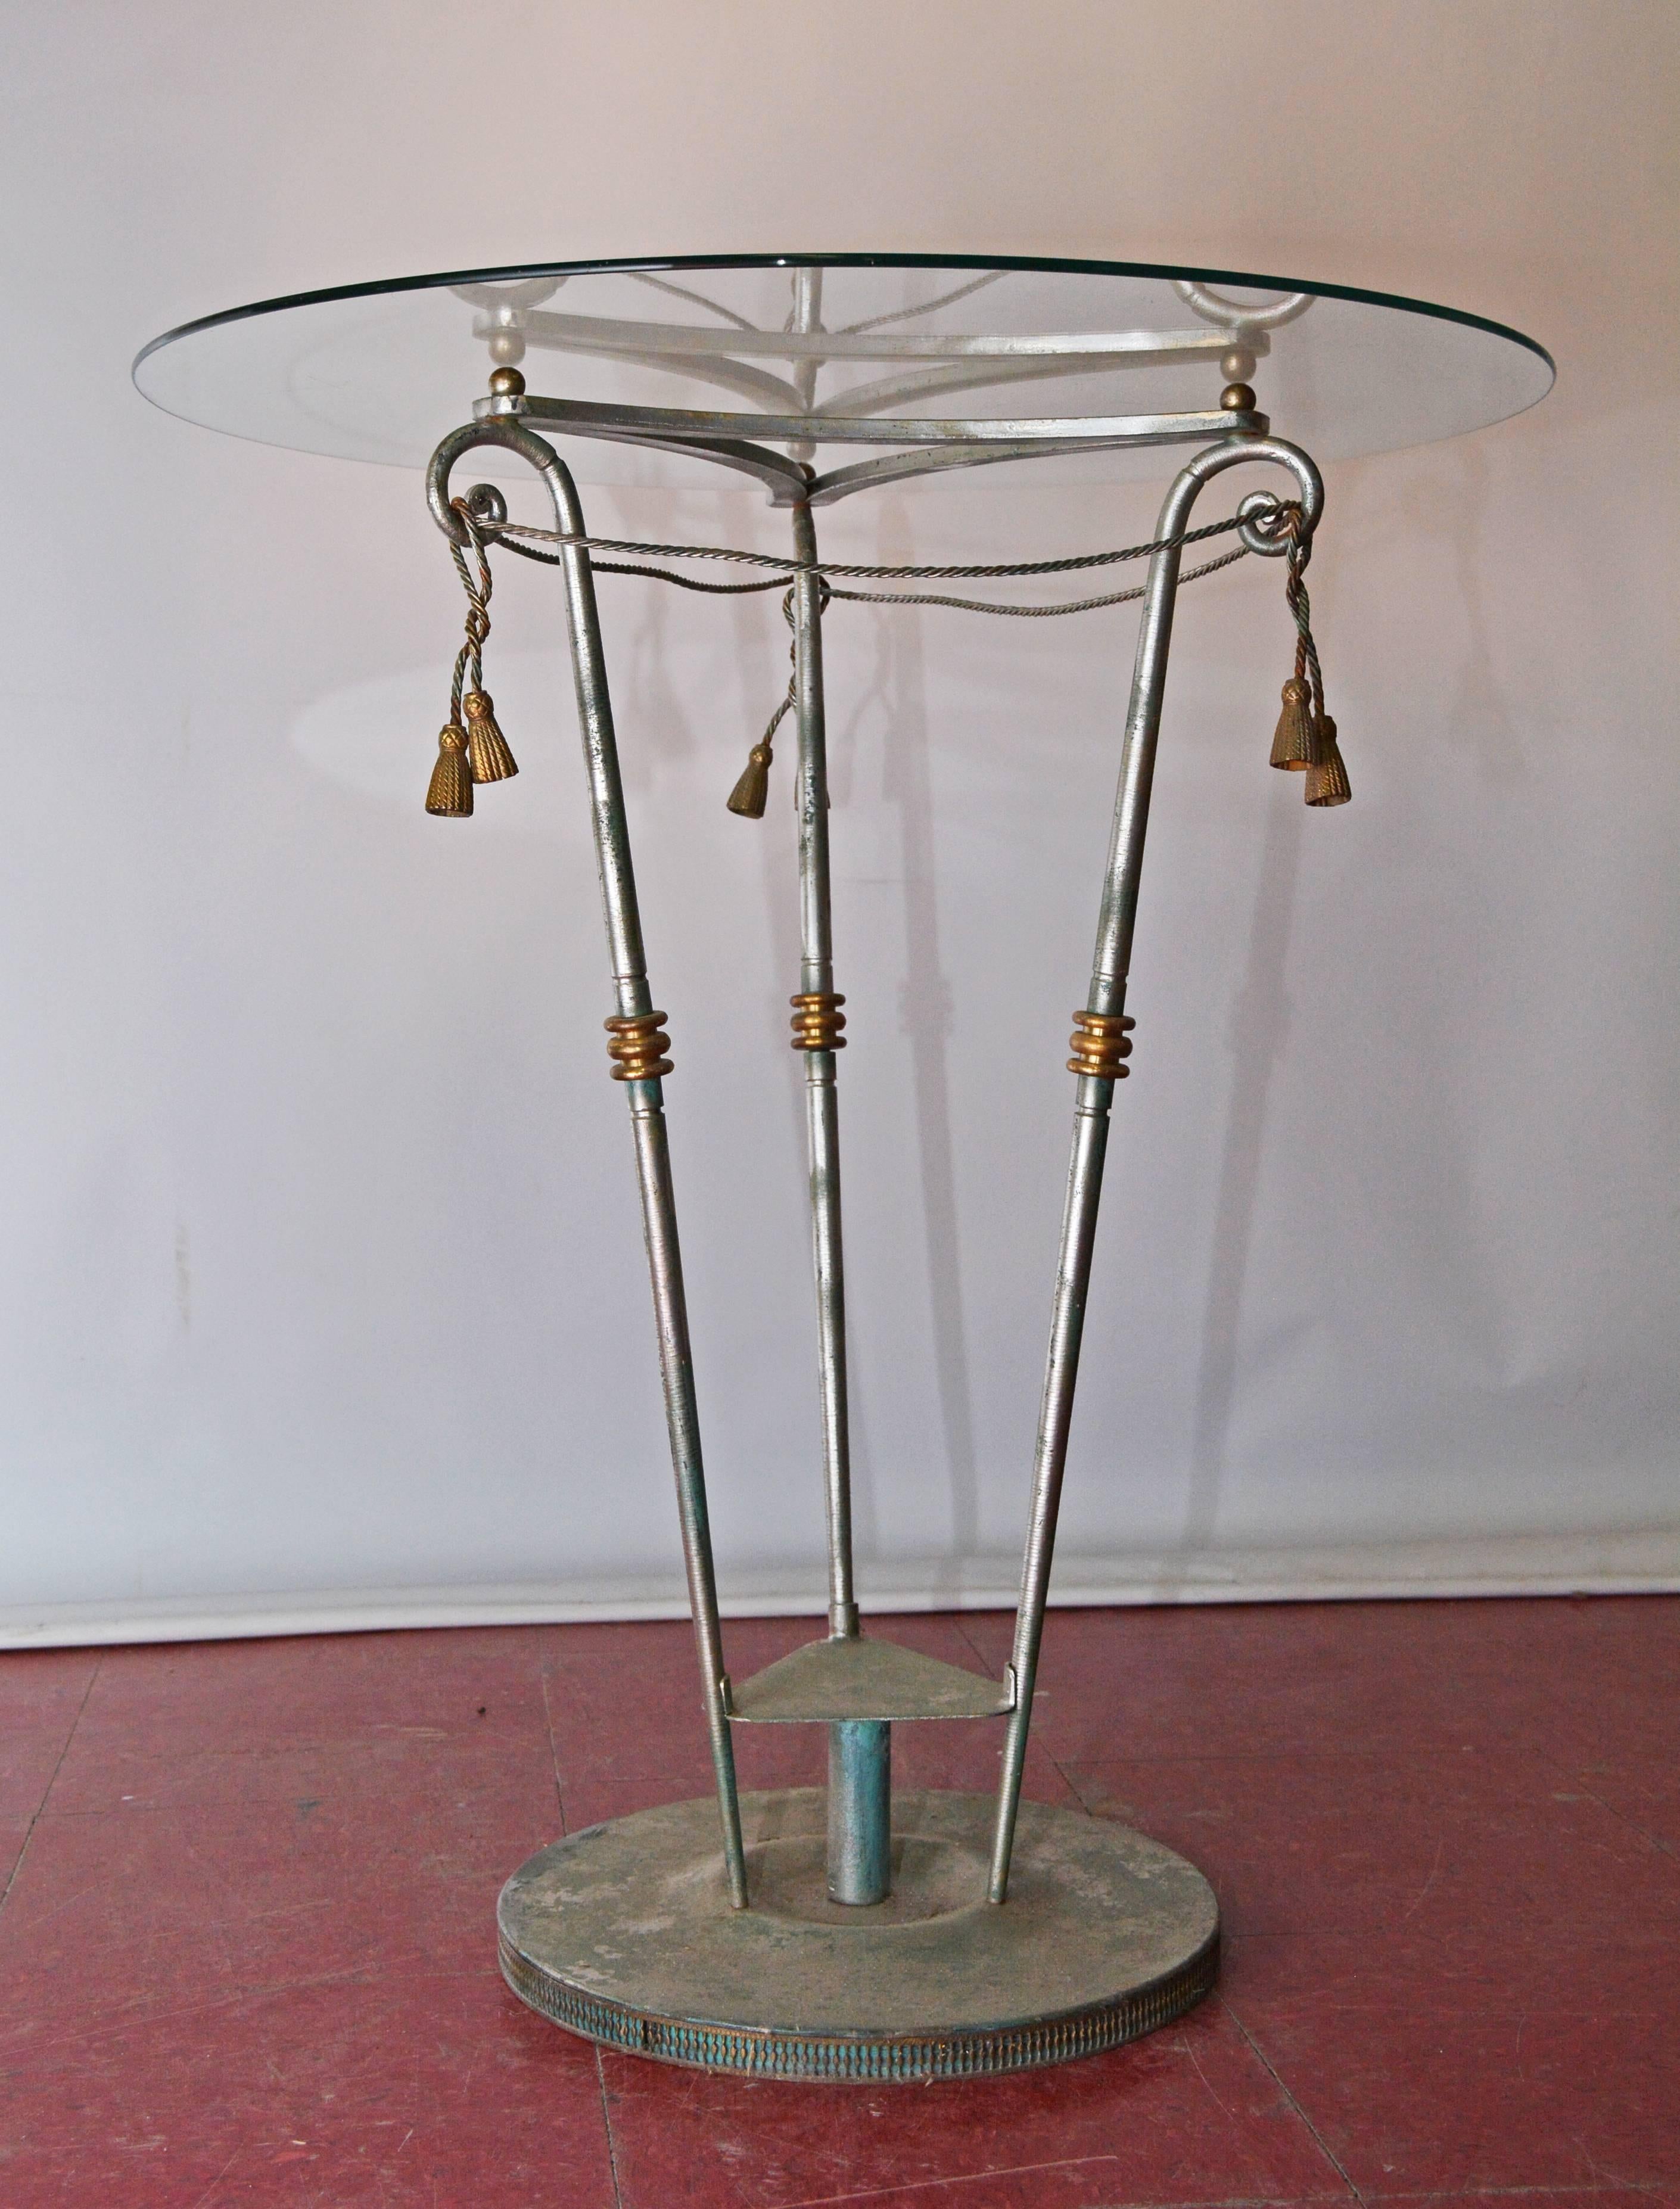 This pedestal center table has a round glass top that sits on an iron base which is both painted and gilded. The three angled legs are connected at the top by iron tasseled cords. Can be use as a lamp table or a plant stand for flower arrangement or